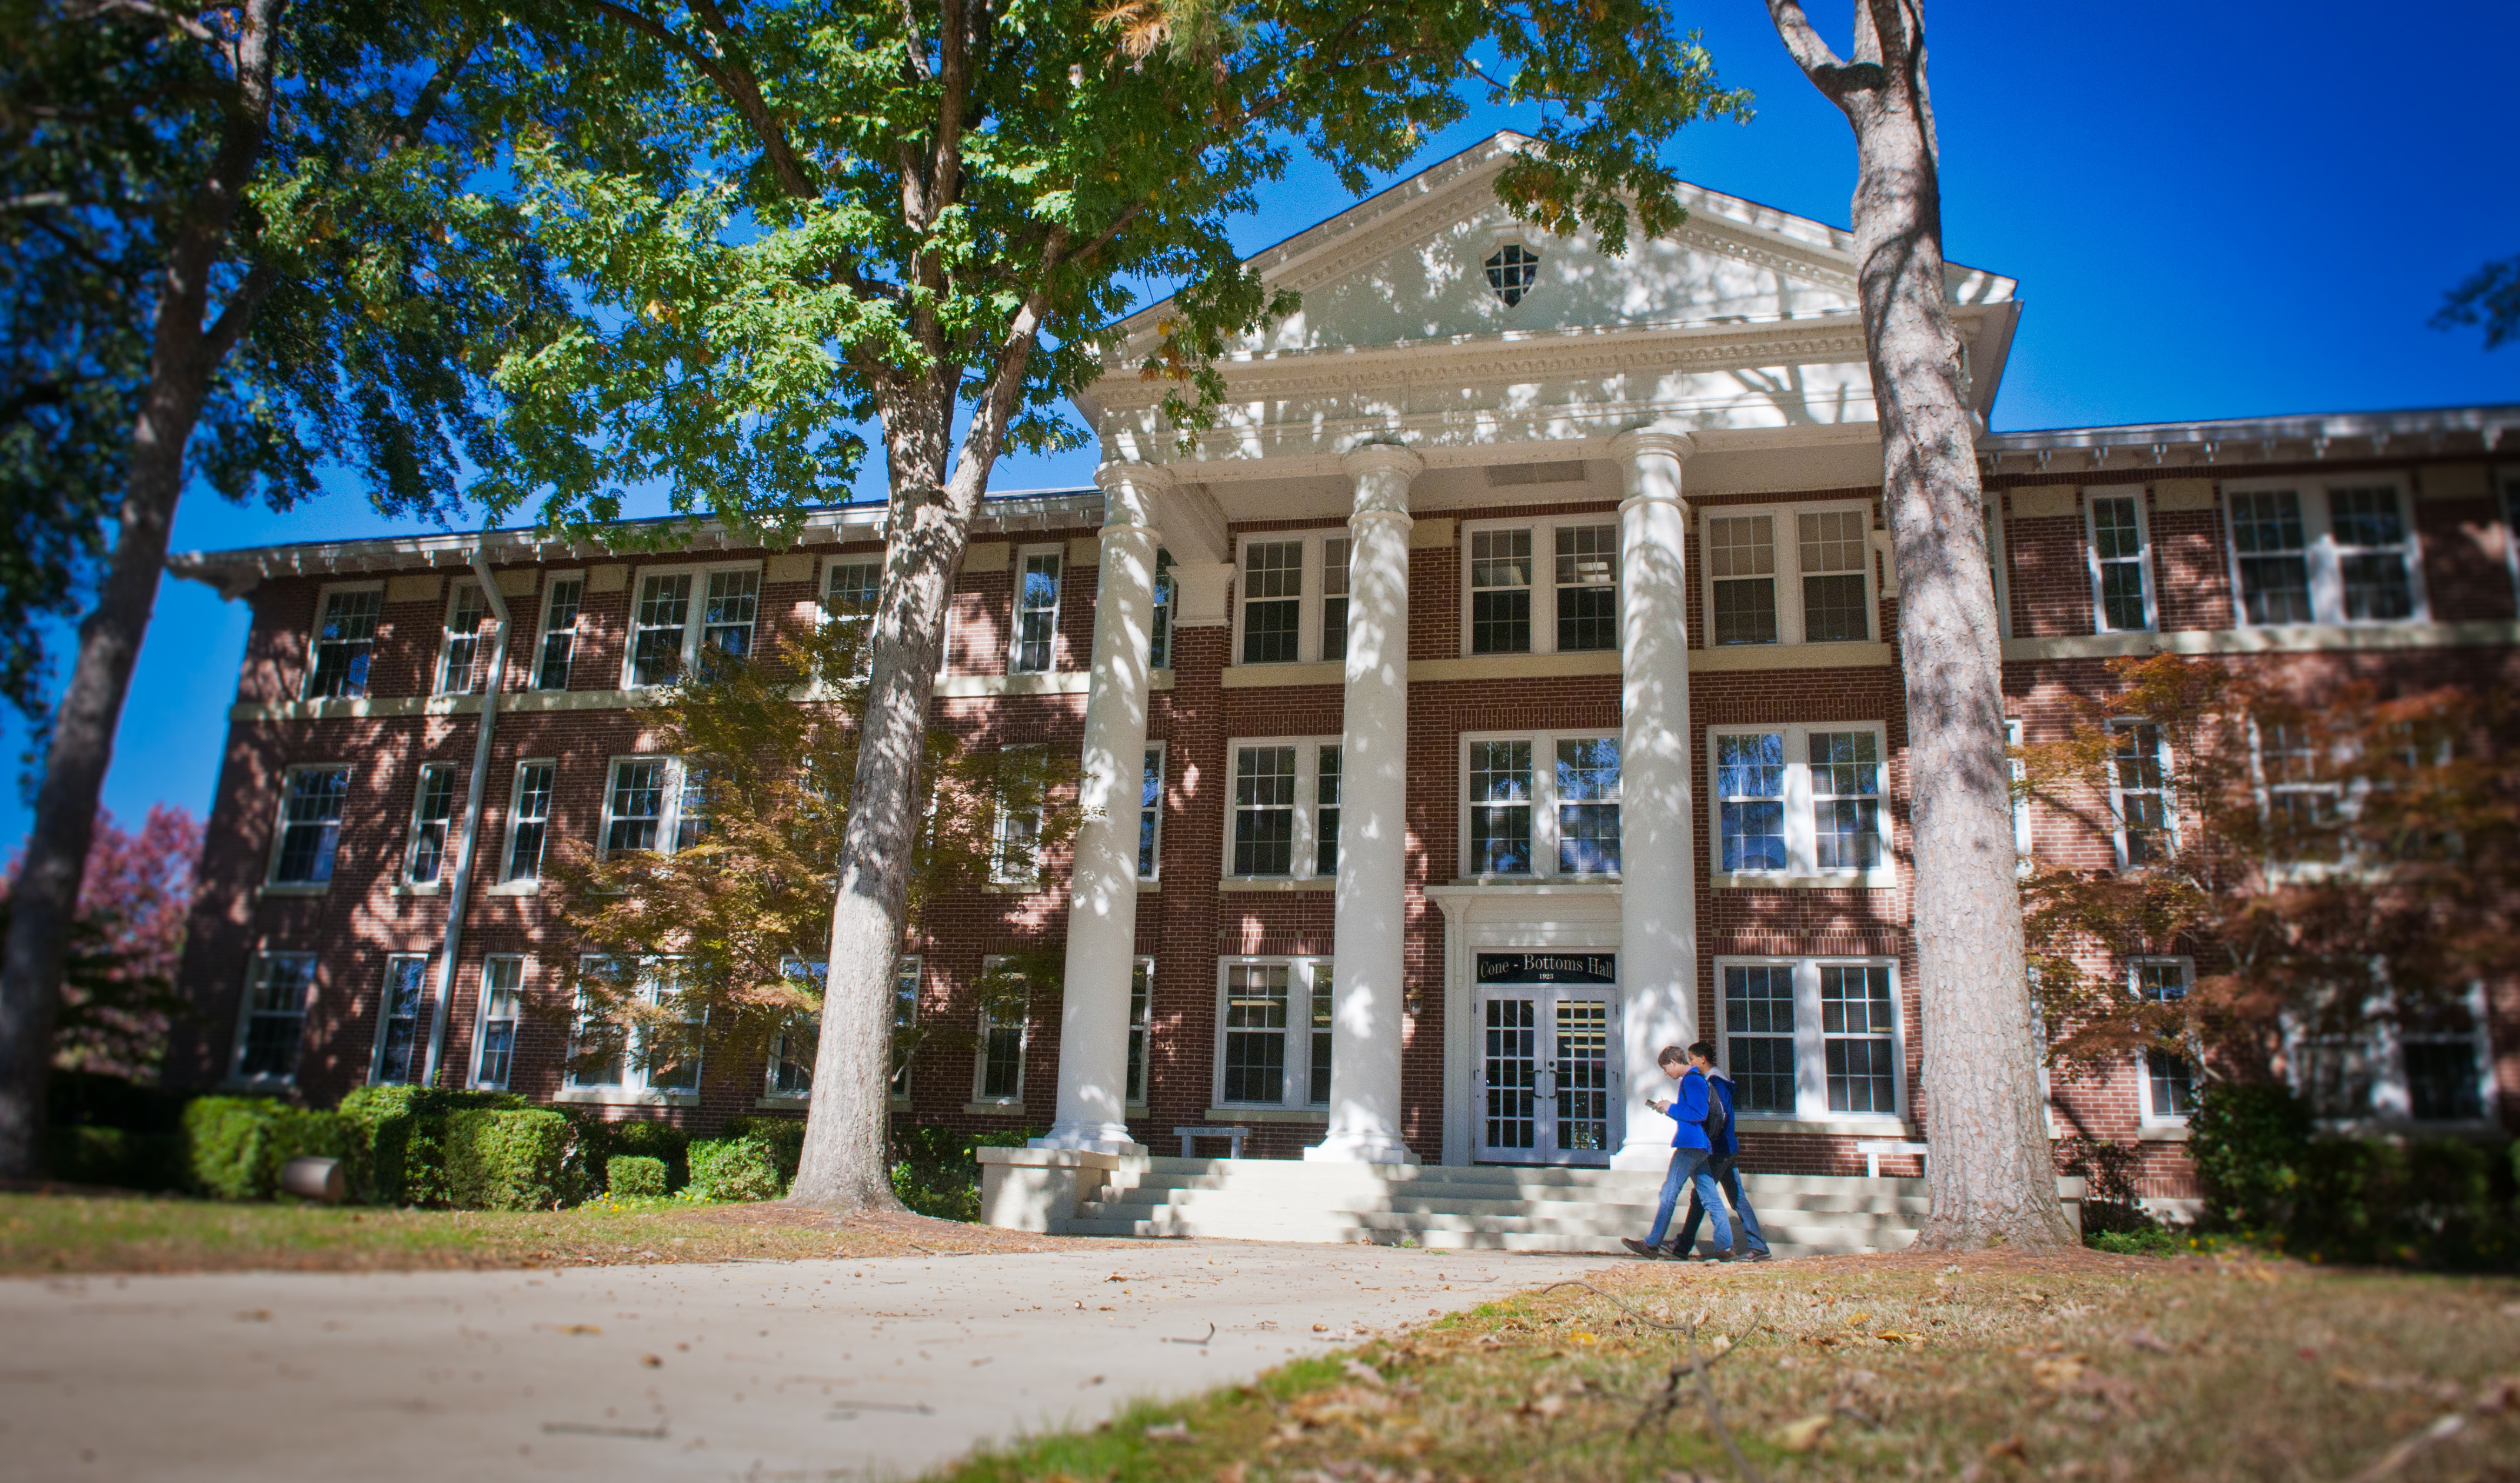 Ouachita earns top tier academic rankings from “Forbes,” “U.S. News” and “USAToday.